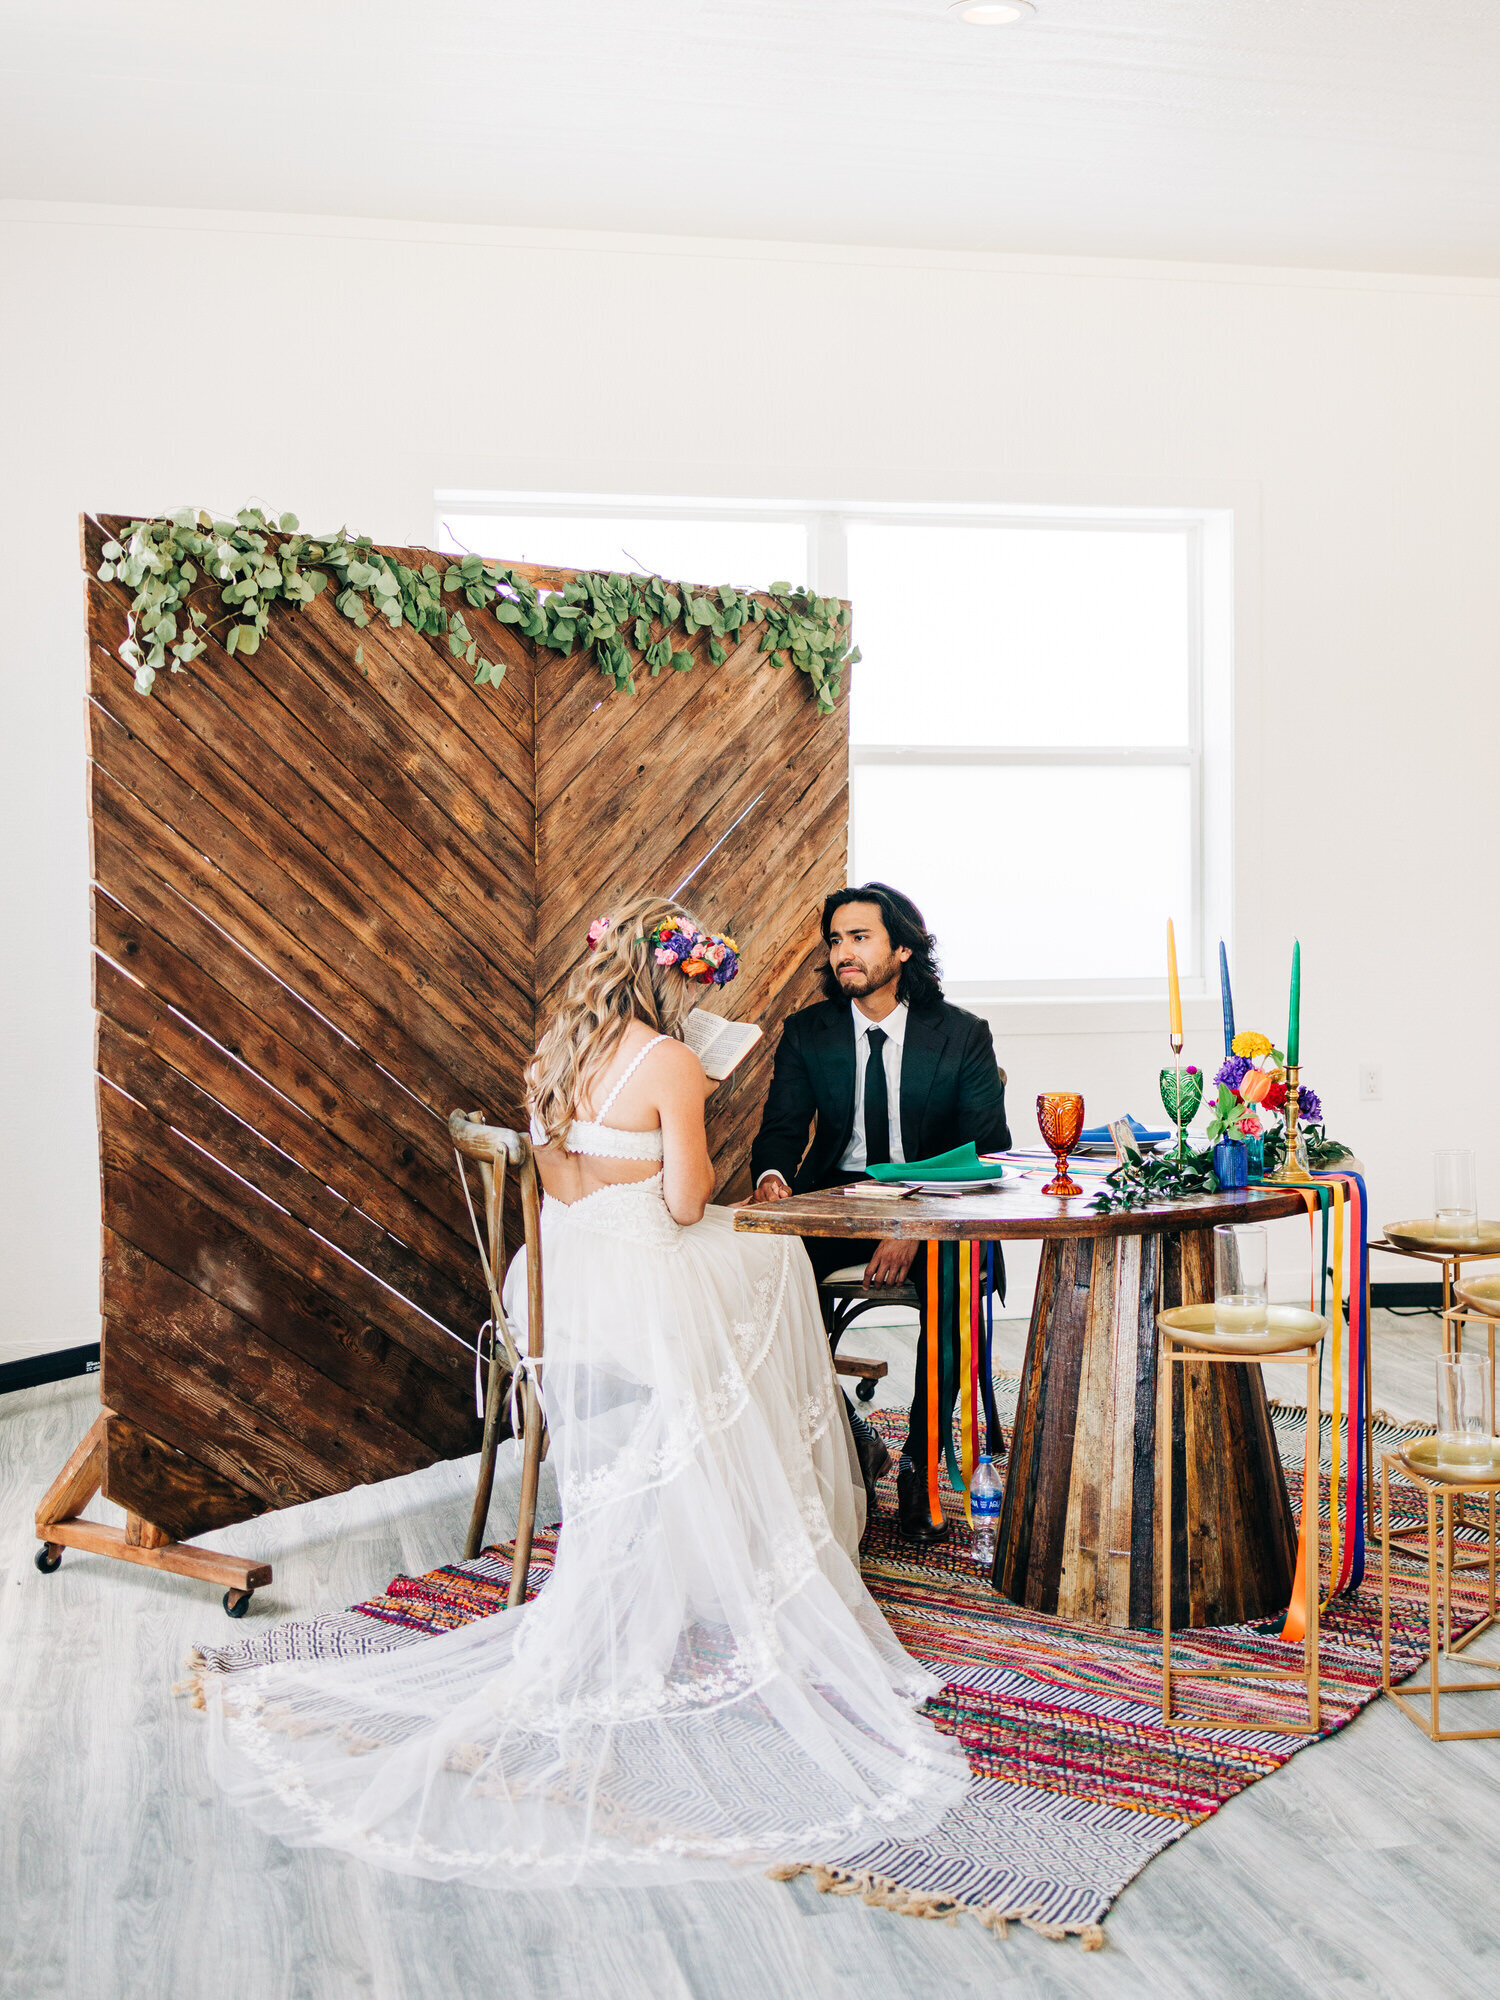 A bride and a groom sit at their sweetheart table in an all-white reception venue. The table is decorated with colorful candles and ribbons. The bride is wearing a flower crown and a boho wedding dress. The bride and groom are reading letters to each other before their wedding ceremony. This image was taken by a wedding photographer in Austin, TX.